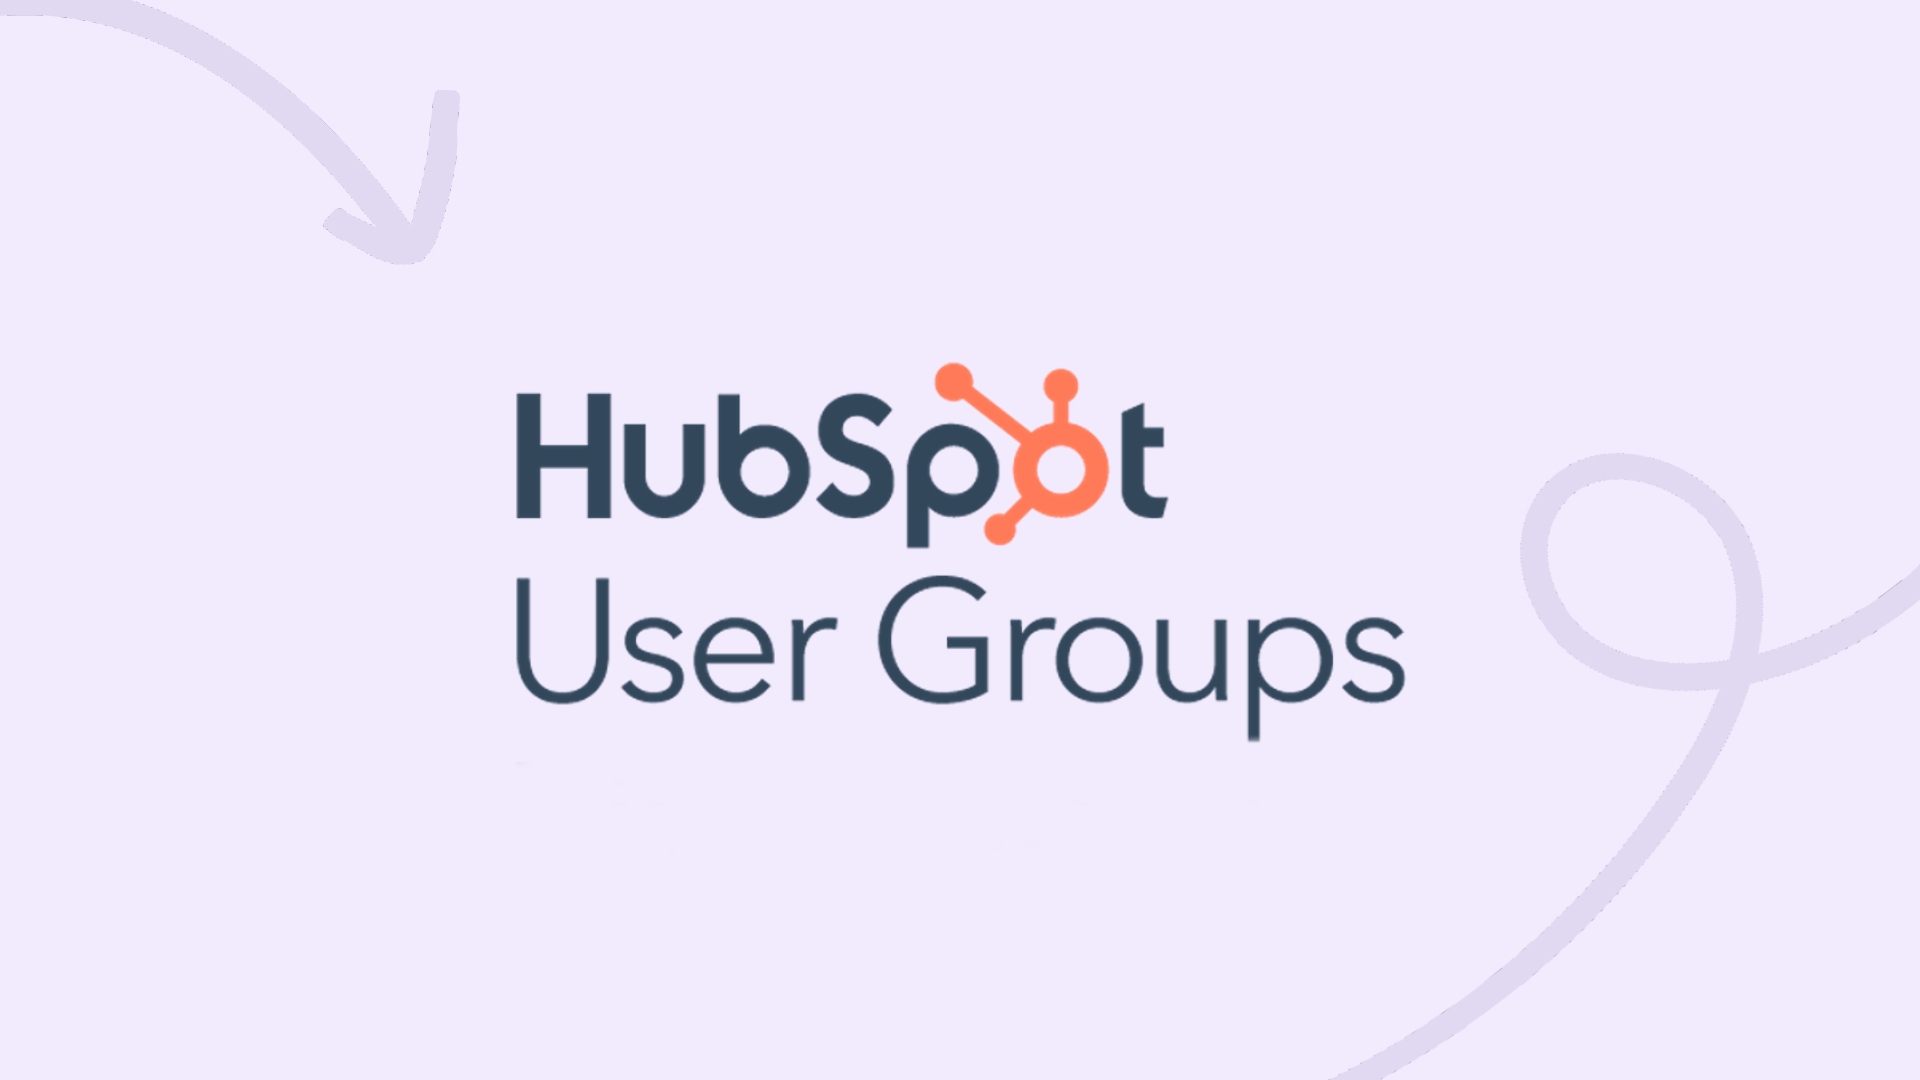 5 reasons why you should attend a HubSpot User Groups (HUG) event